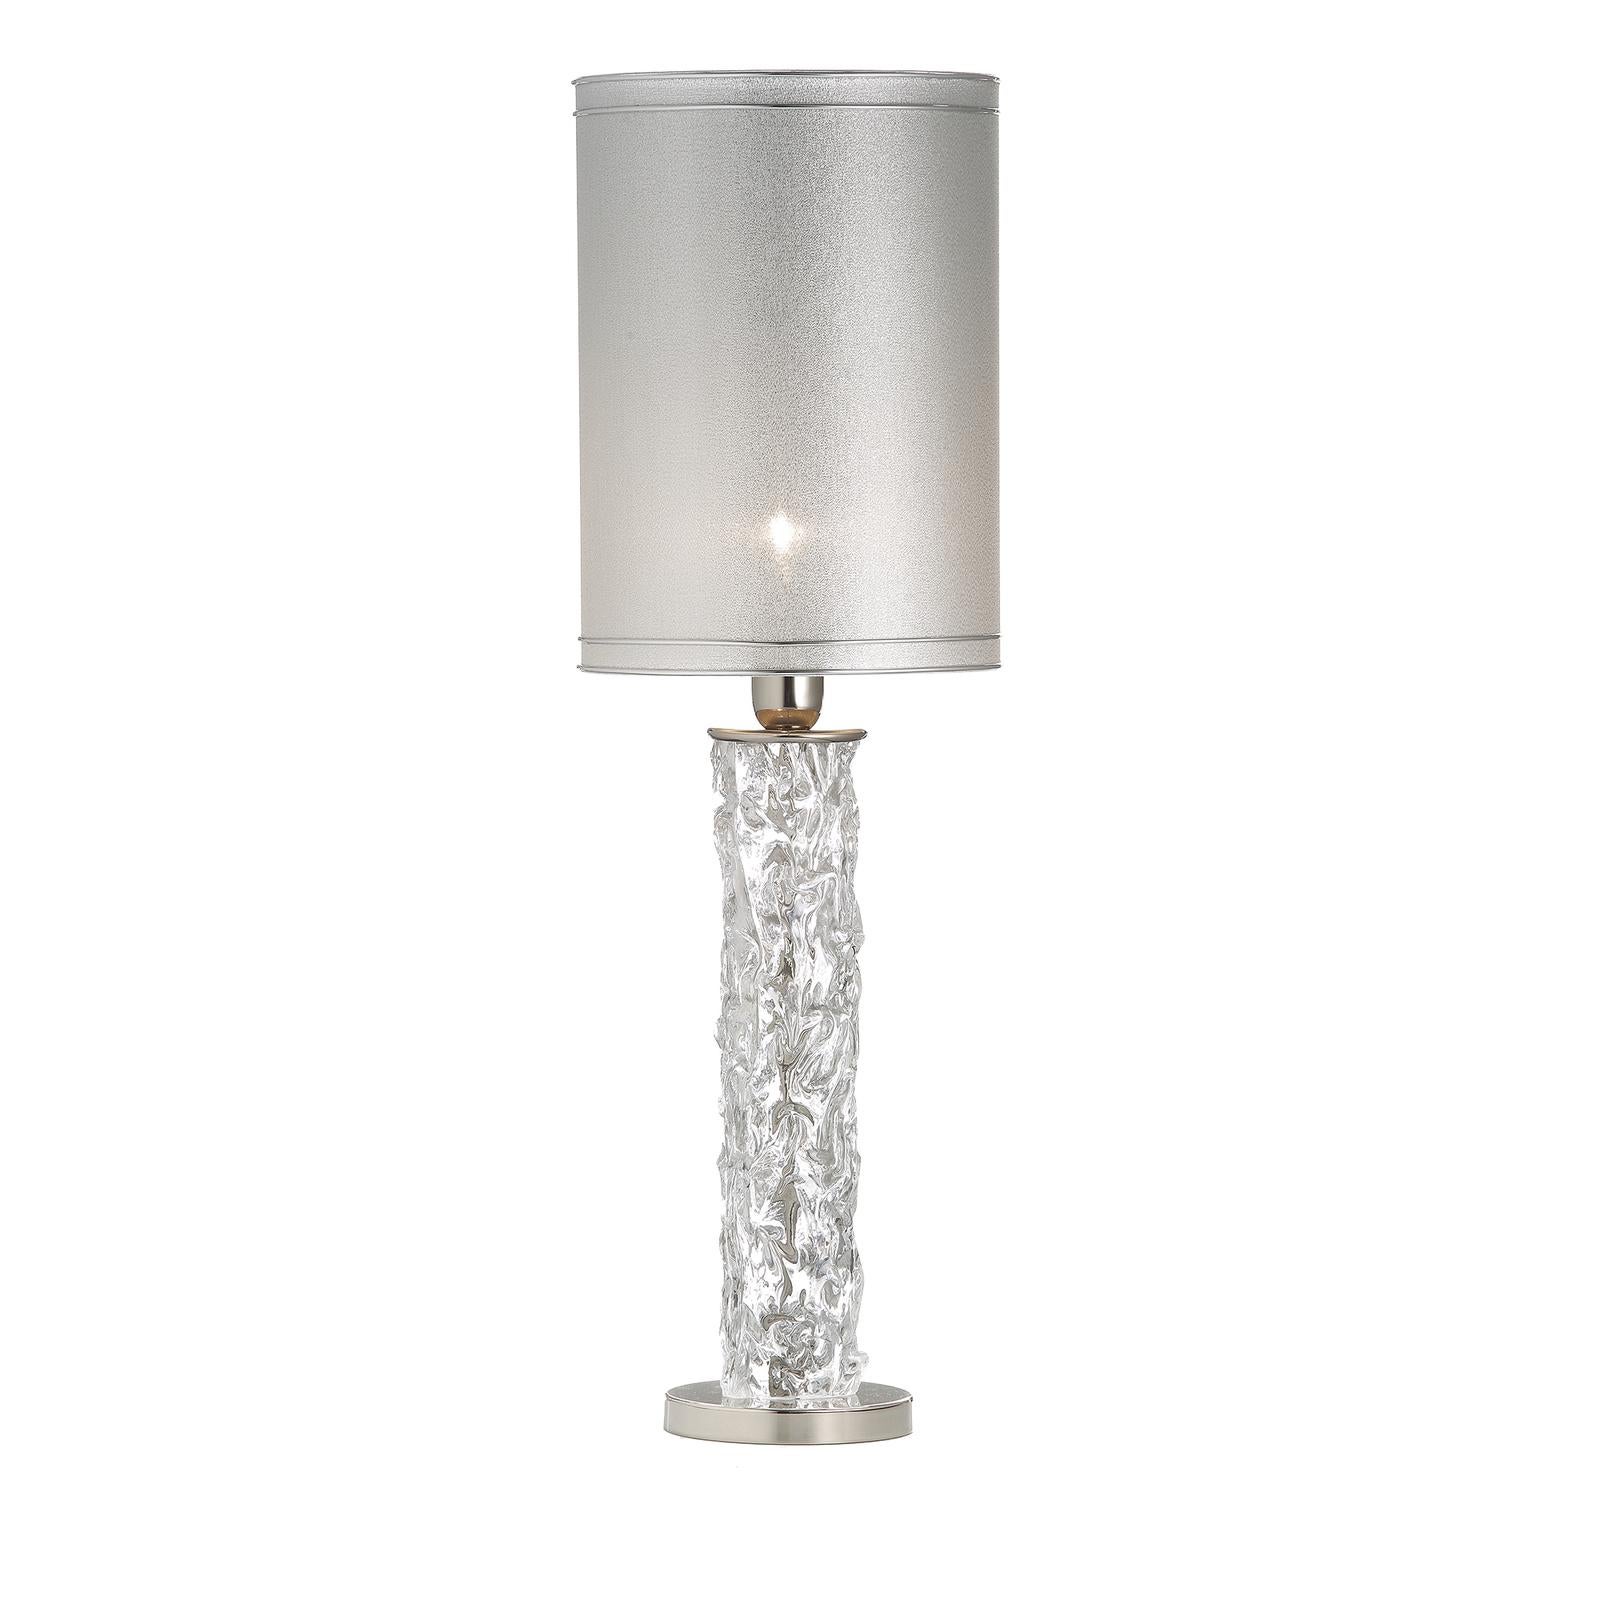 This stunning table lamp is an exquisite example of masterful craftsmanship combined with a contemporary aesthetic. Resting on a metal base with a polished nickel finish, the body of the lamp is made of transparent Murano glass shaped with several